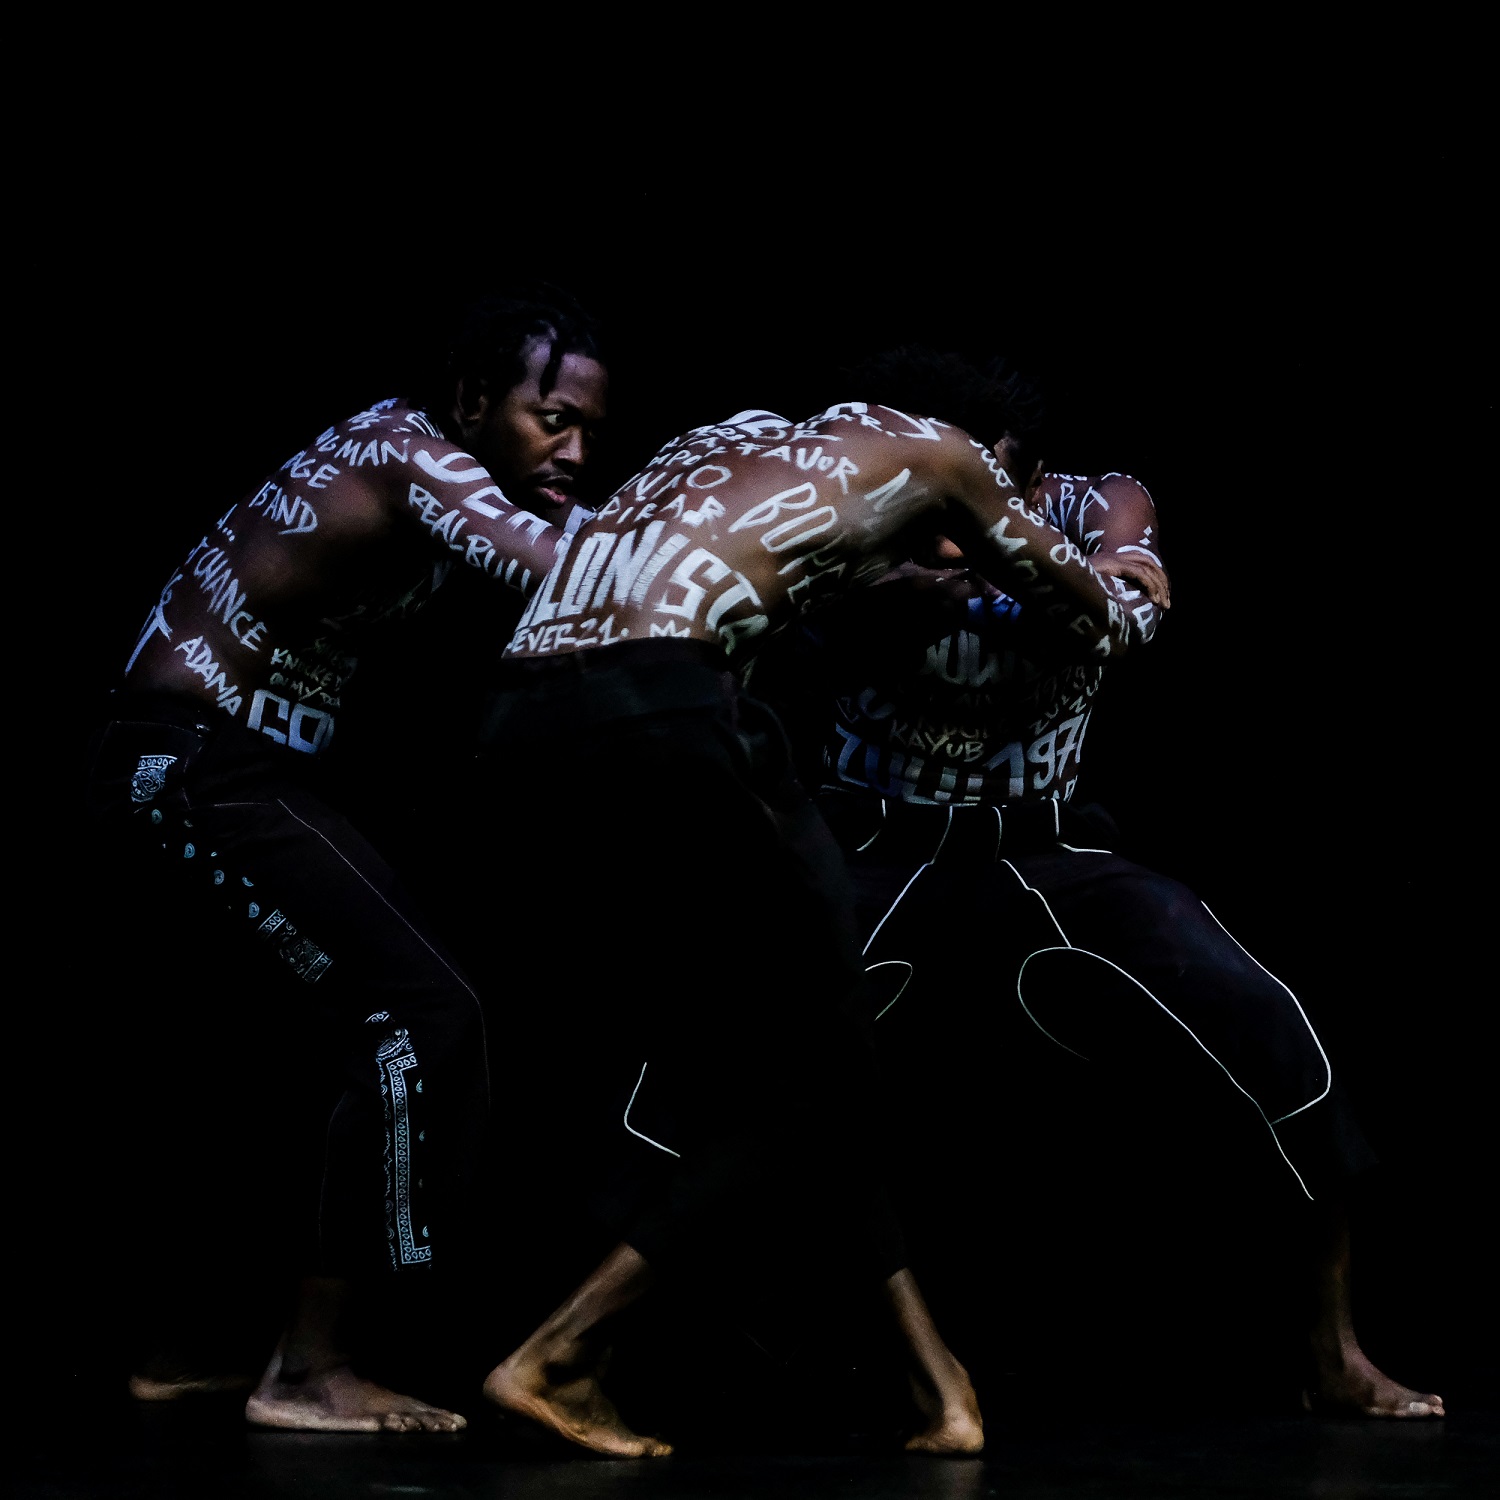 Three dance artists bend over in towards each other on a black stage. They are topless with words written in white paint all over their torsos and arms. They have short black pants and bare feet.